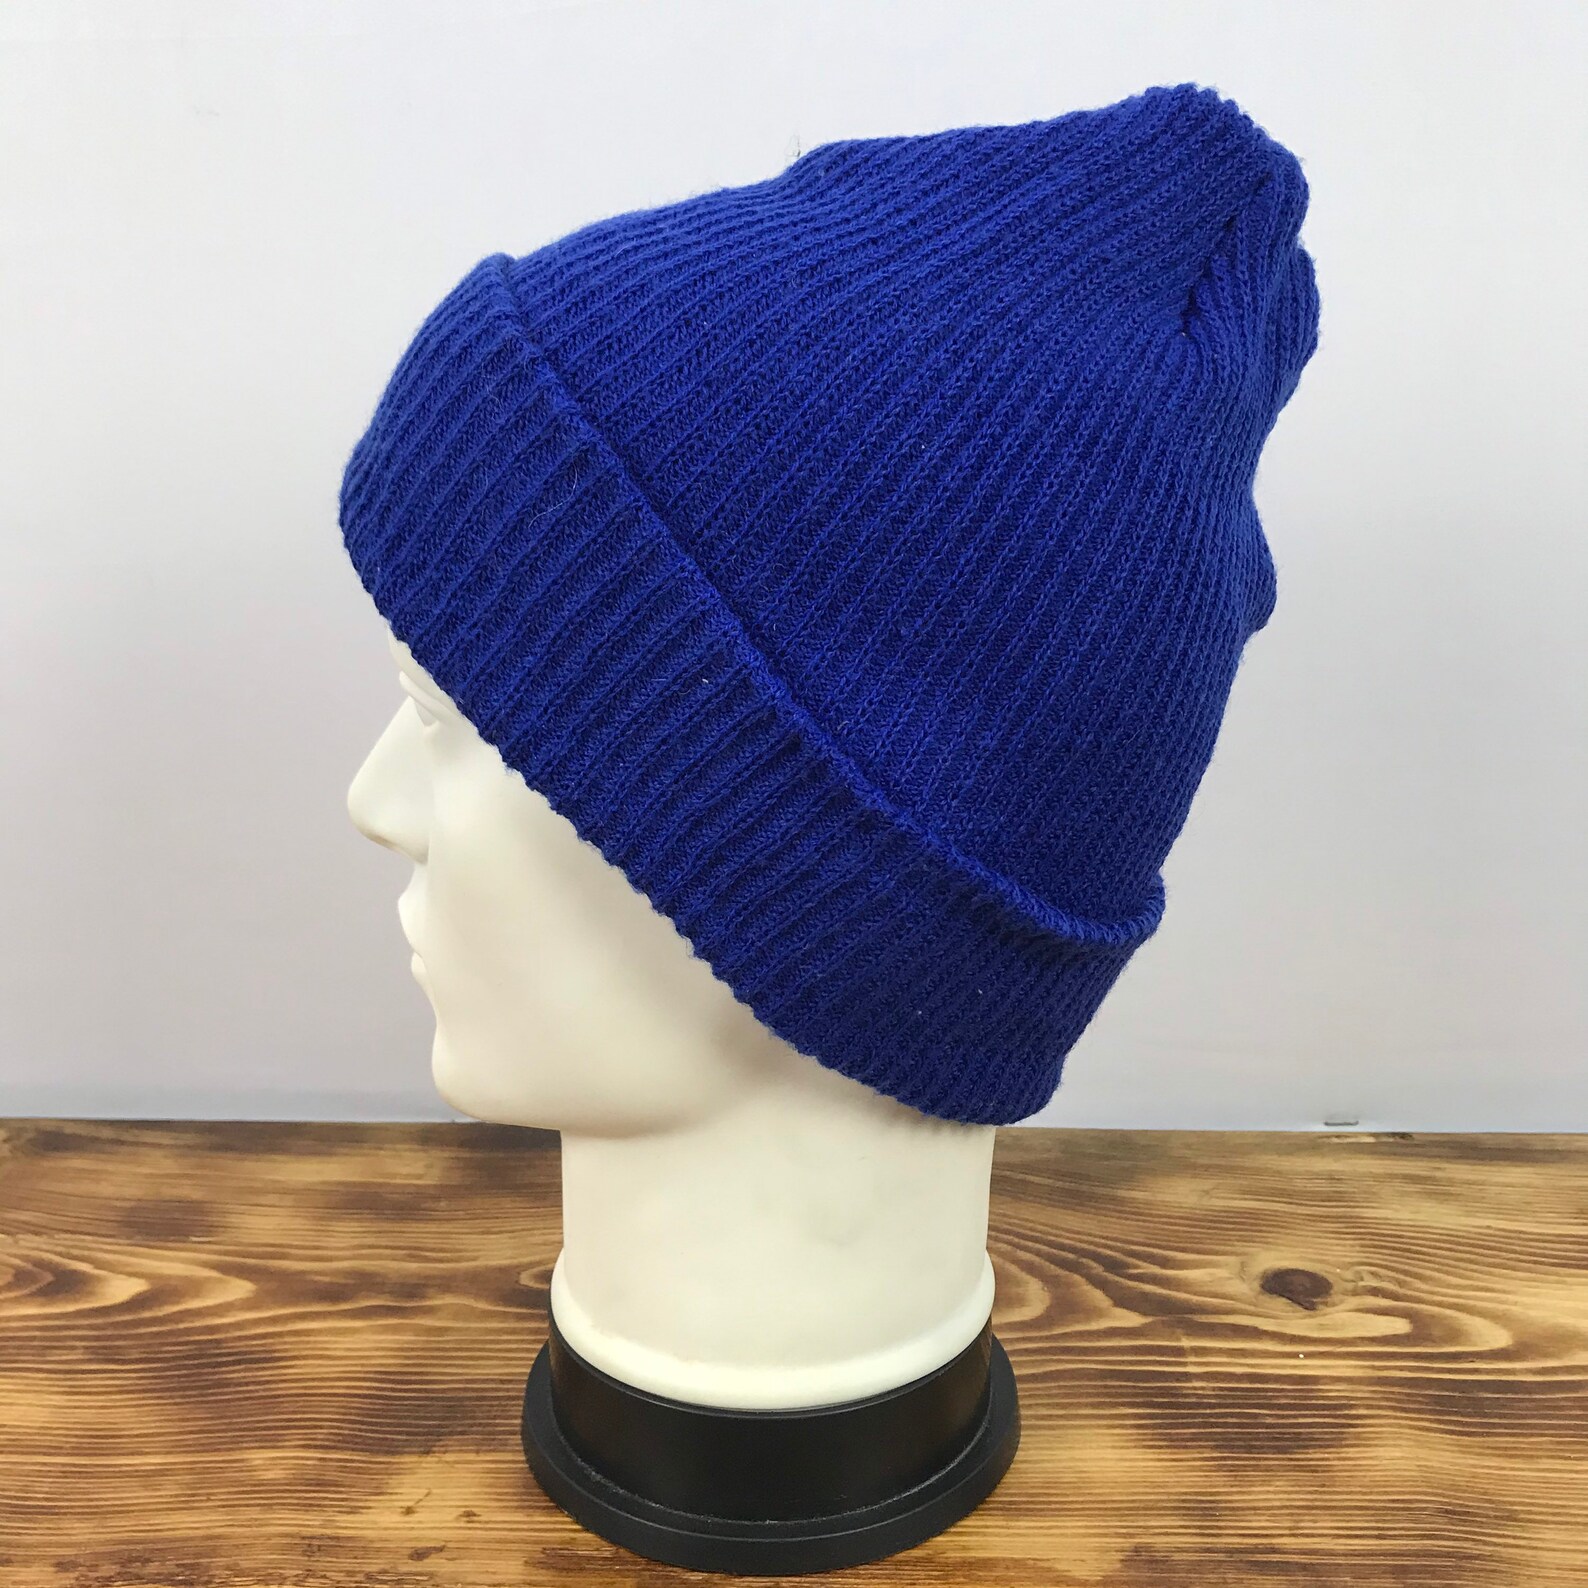 RAY BEAMS Solid Blue Beanie Hat Made in Korea - Etsy